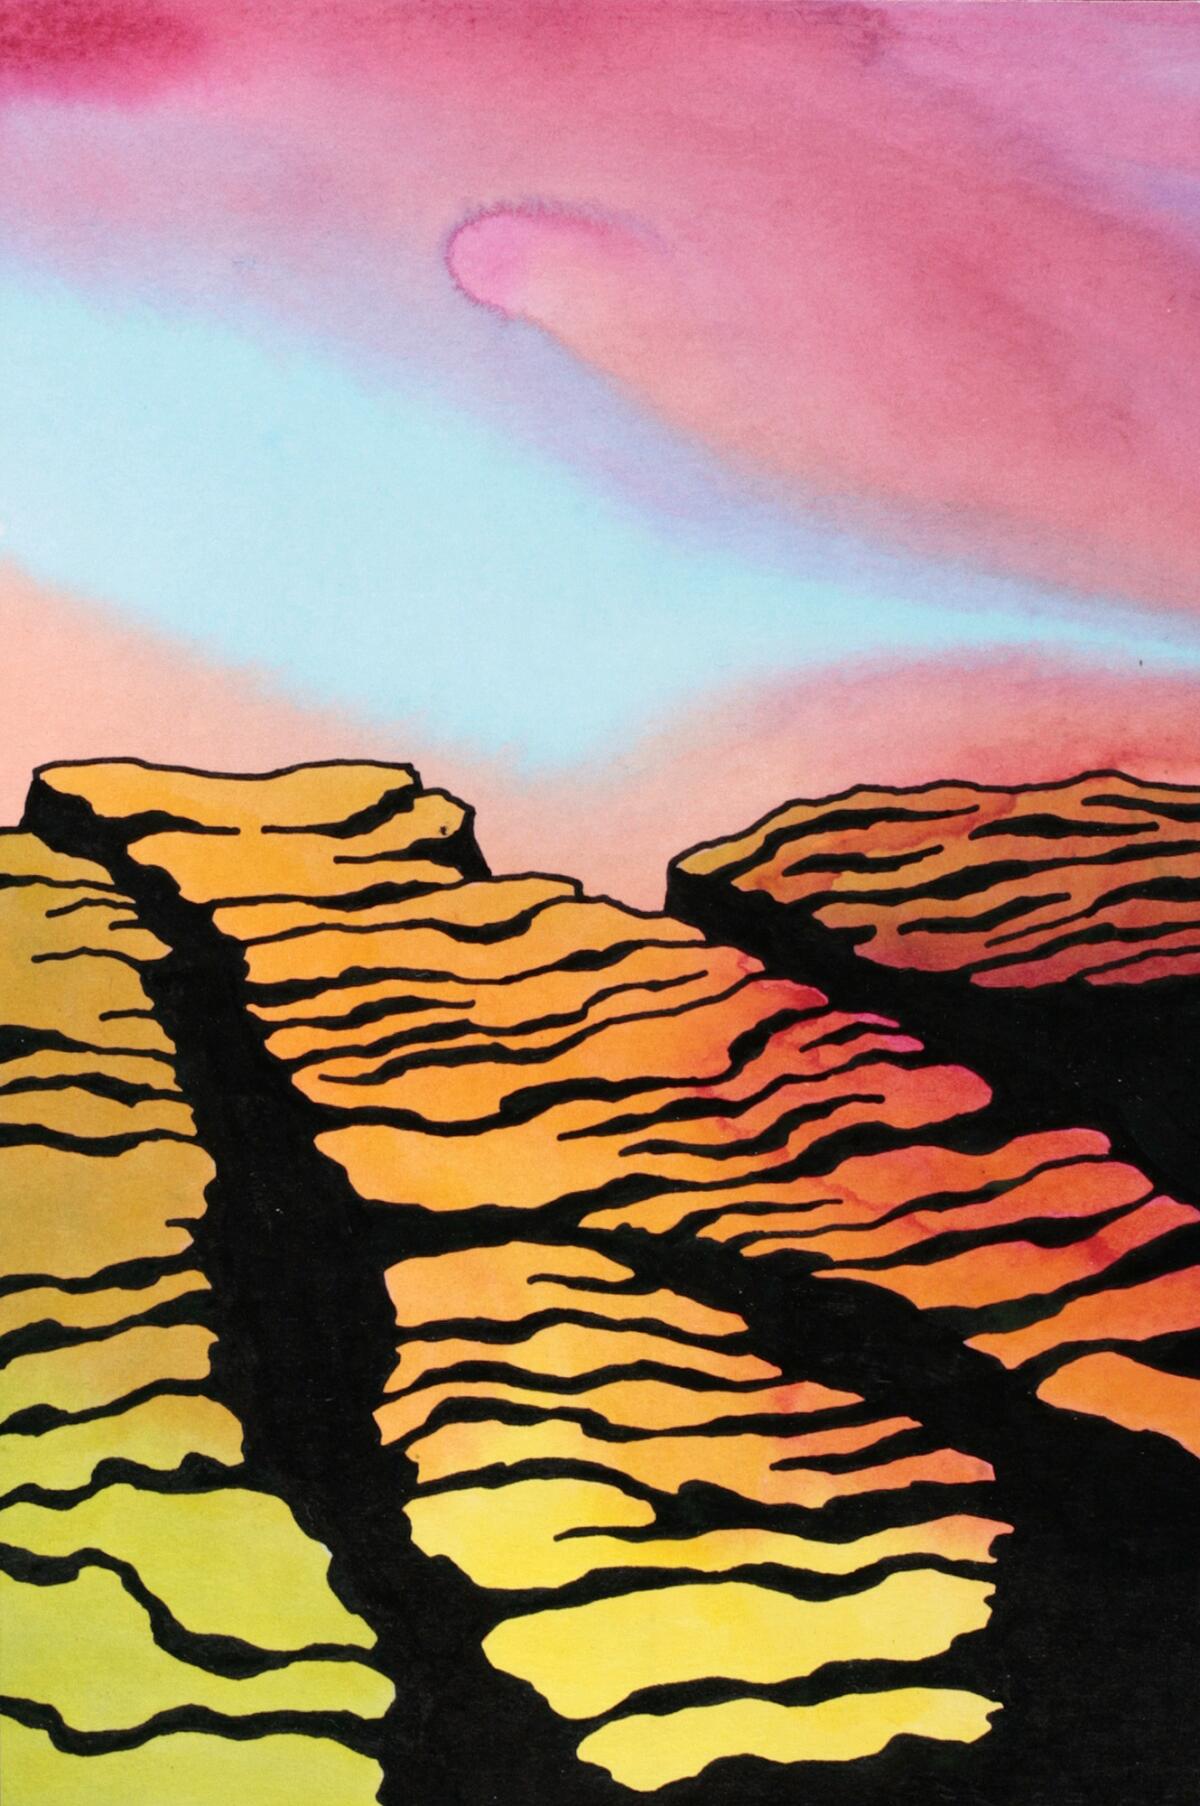 Ken Price's "Barren Rock," 2006, acrylic and ink on paper, 9 by 6 inches. (Matthew Marks Gallery)